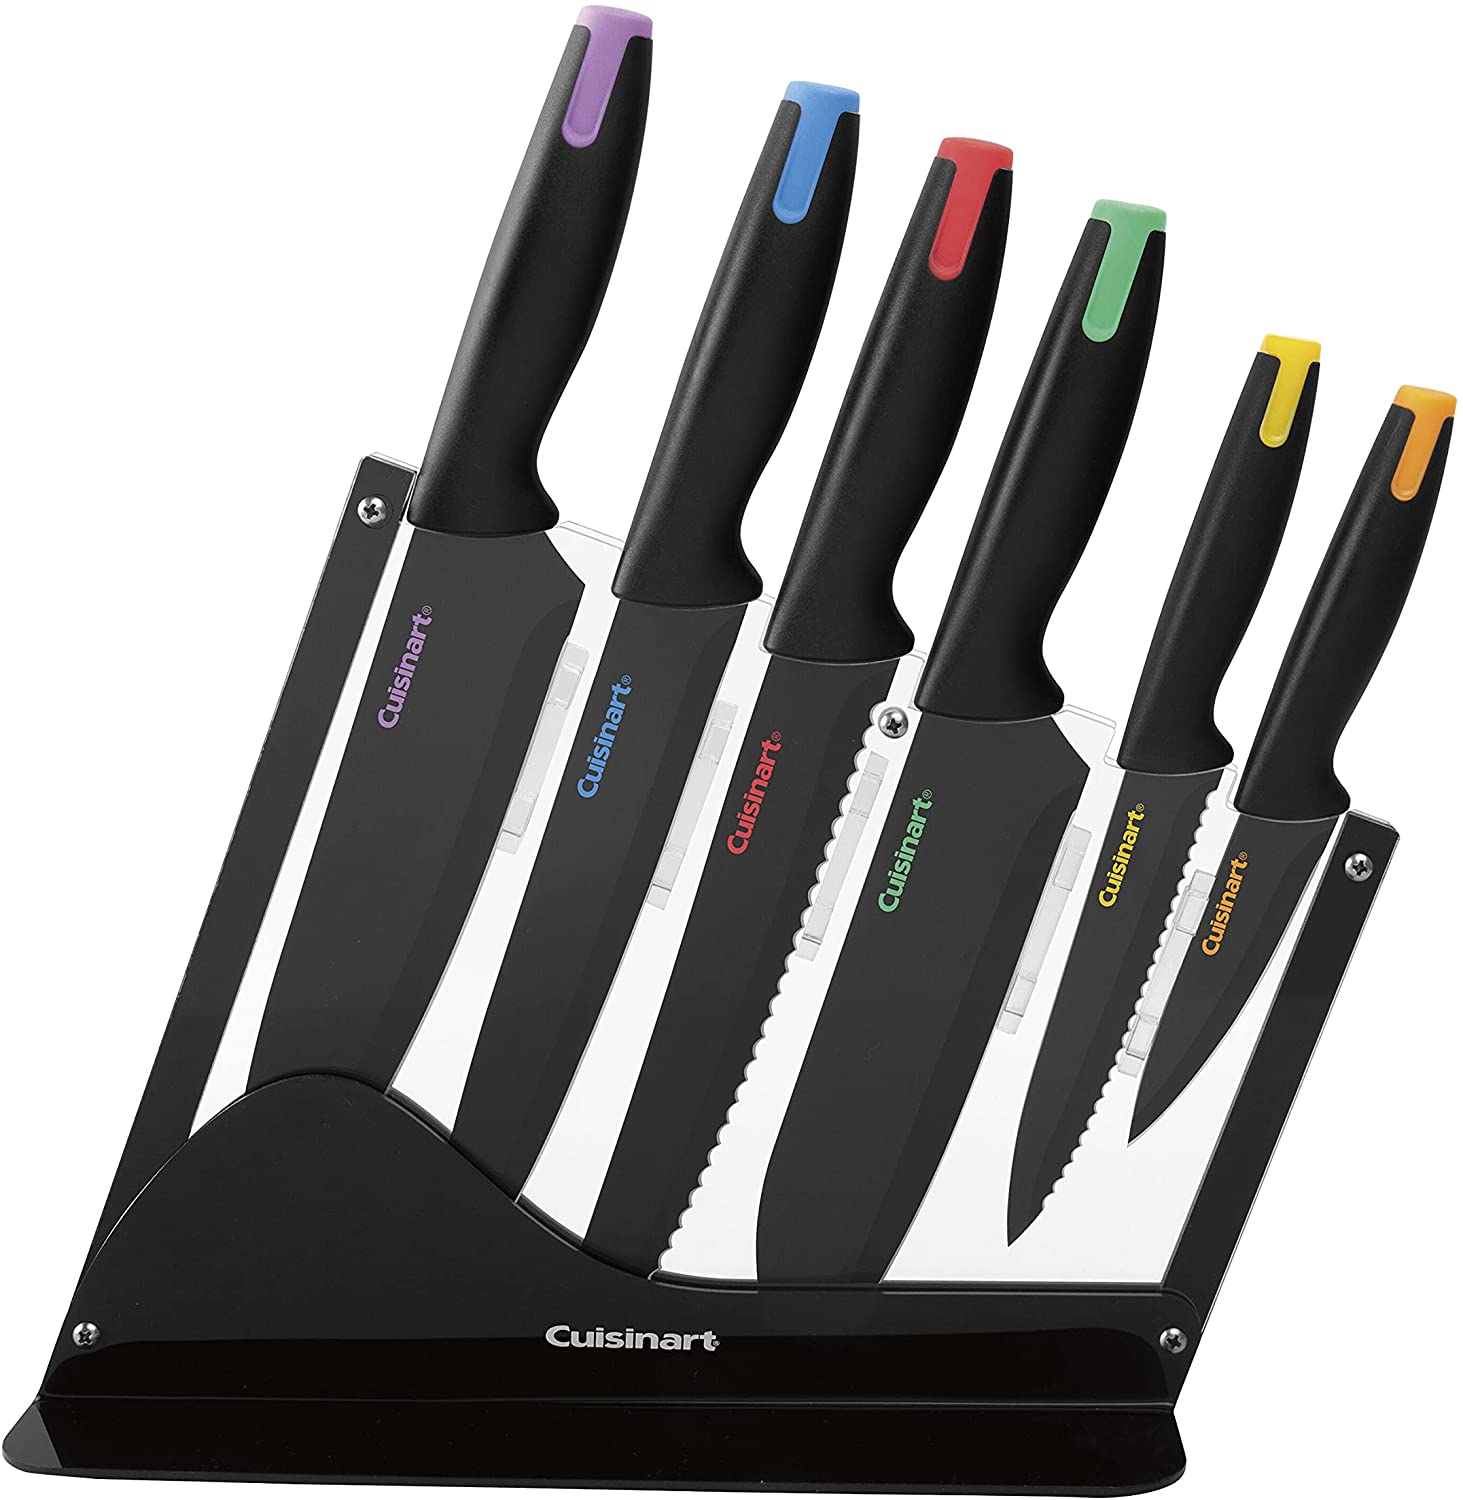 Cuisinart C55-7PCE 7 Pieces Ceramic Coated Cutlery Set with Color End Caps & Acrylic Stand Black